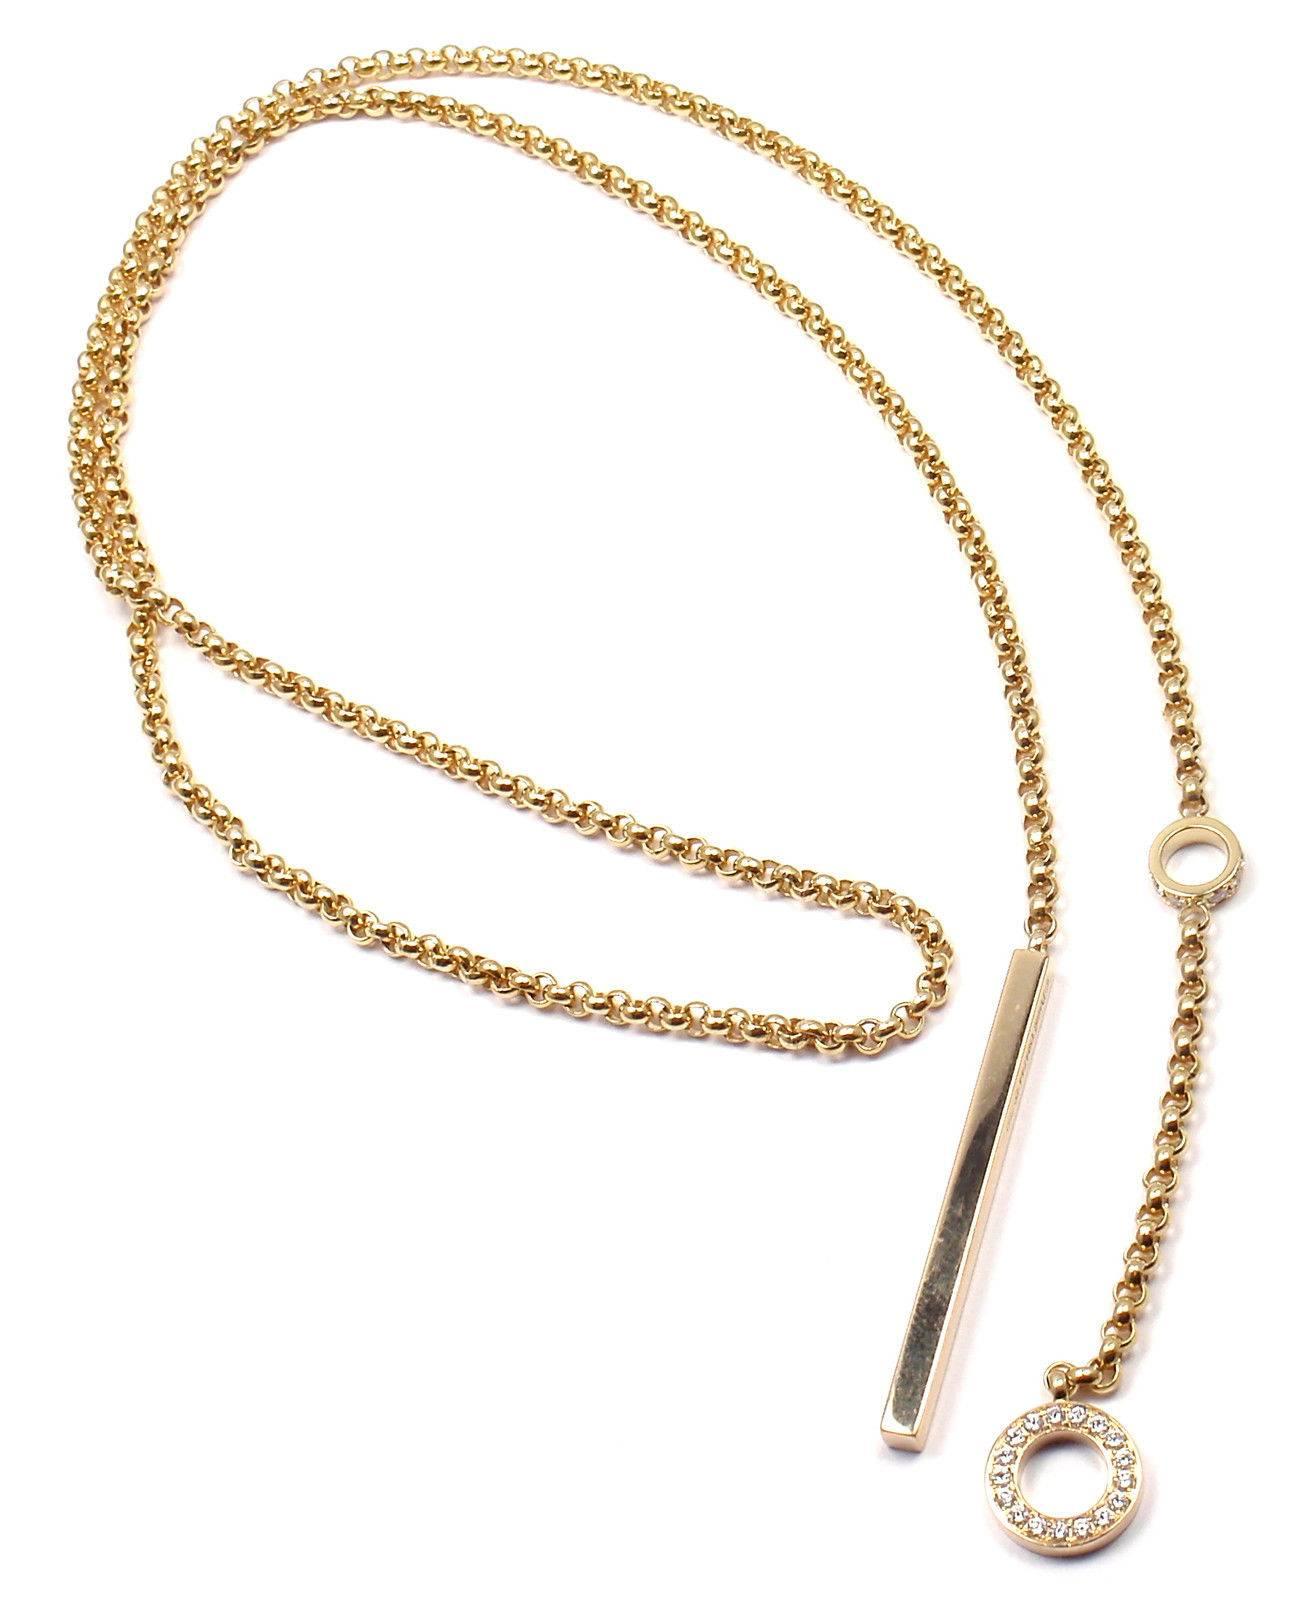 18k Yellow Gold Diamond Lariat Long Possession Necklace by Piaget. 
With 27 round brilliant cut diamonds VVS2 clarity, E color total weight approx. .39ct
This necklace comes with the box.
Retail Price: $6,300 plus tax.

Details: 
Length: 26